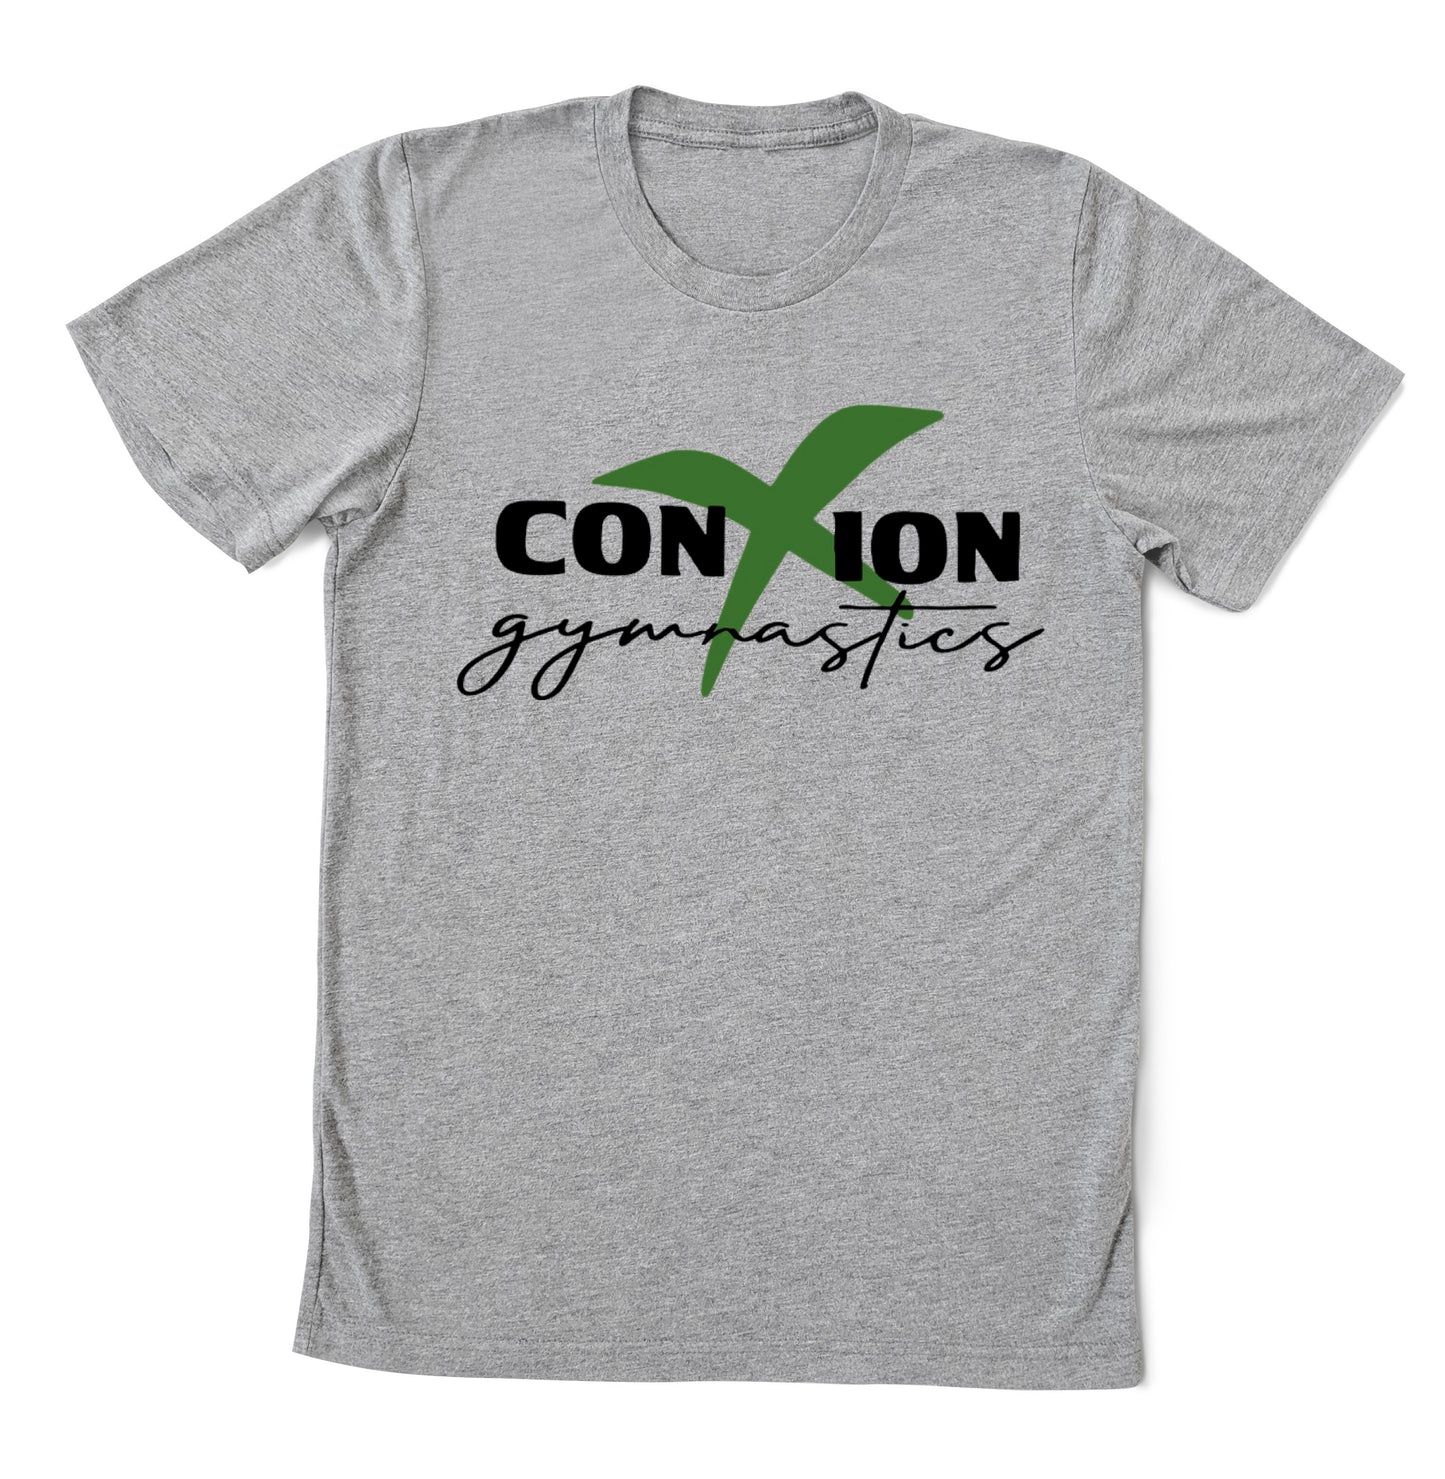 Comfort Colors or Bella Canvas Conxion Gymnastics Shirts/ Youth and Adult Sizes